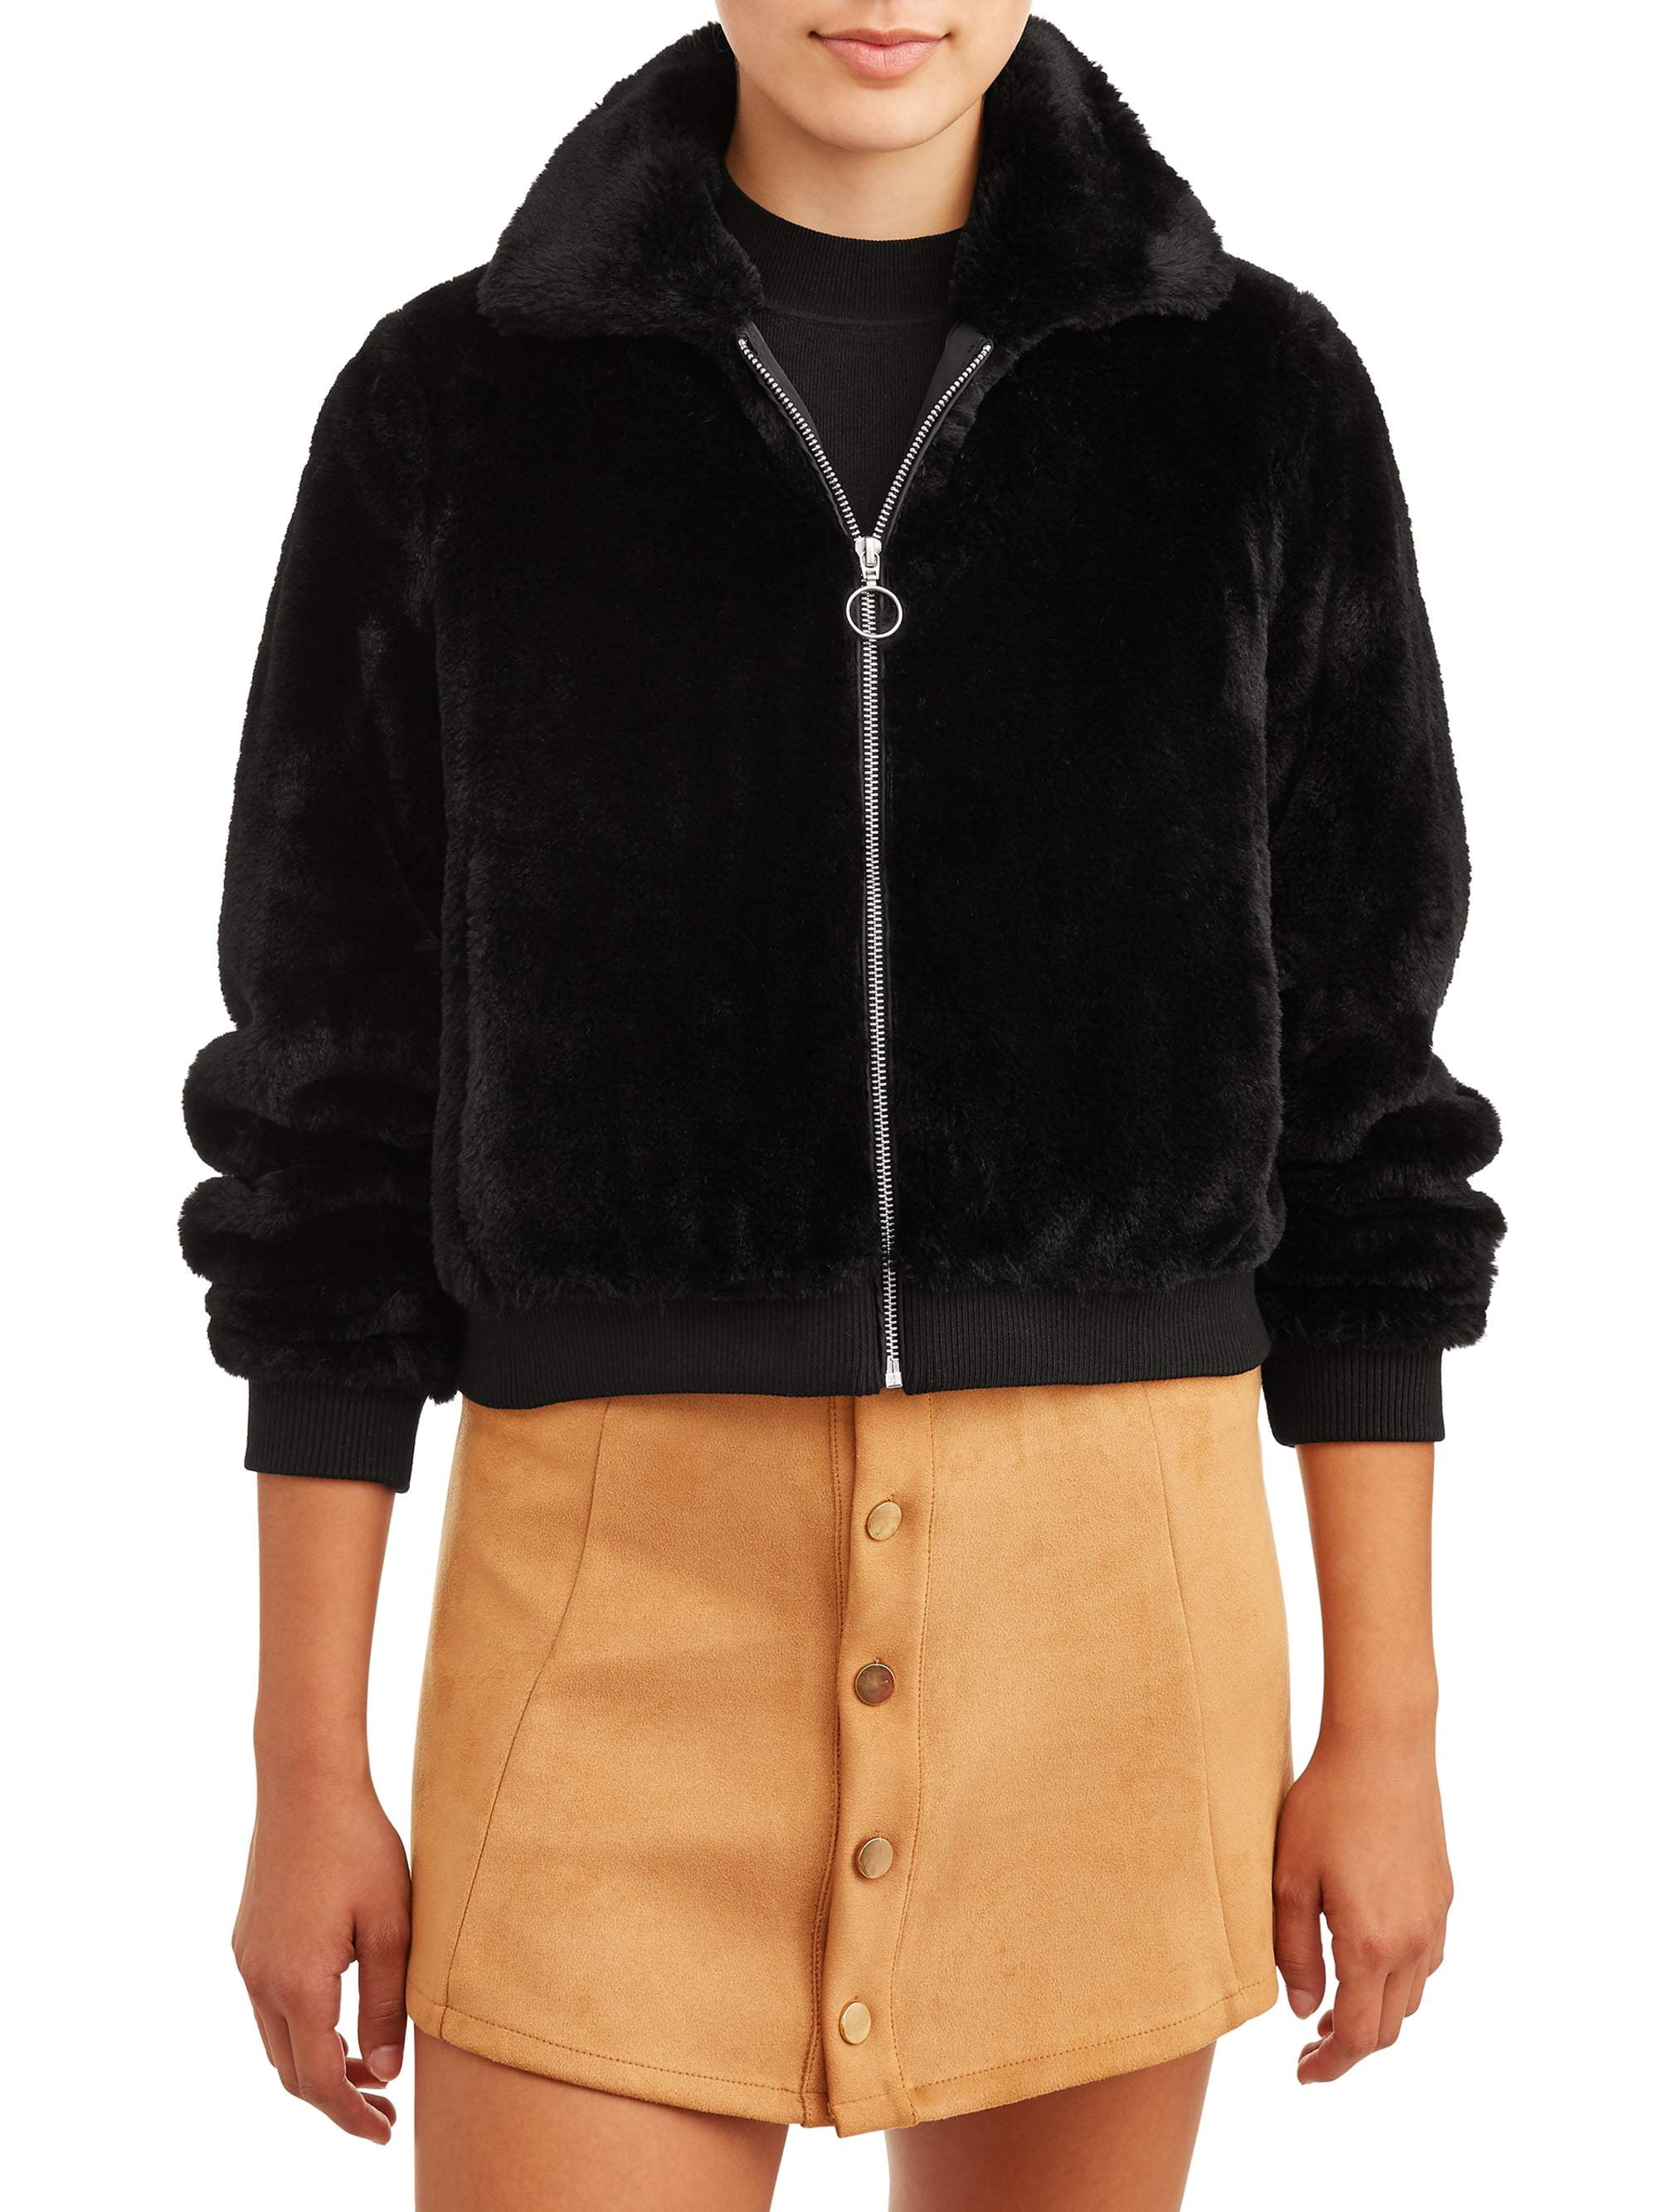 Best fuzzy, fluffy jackets from